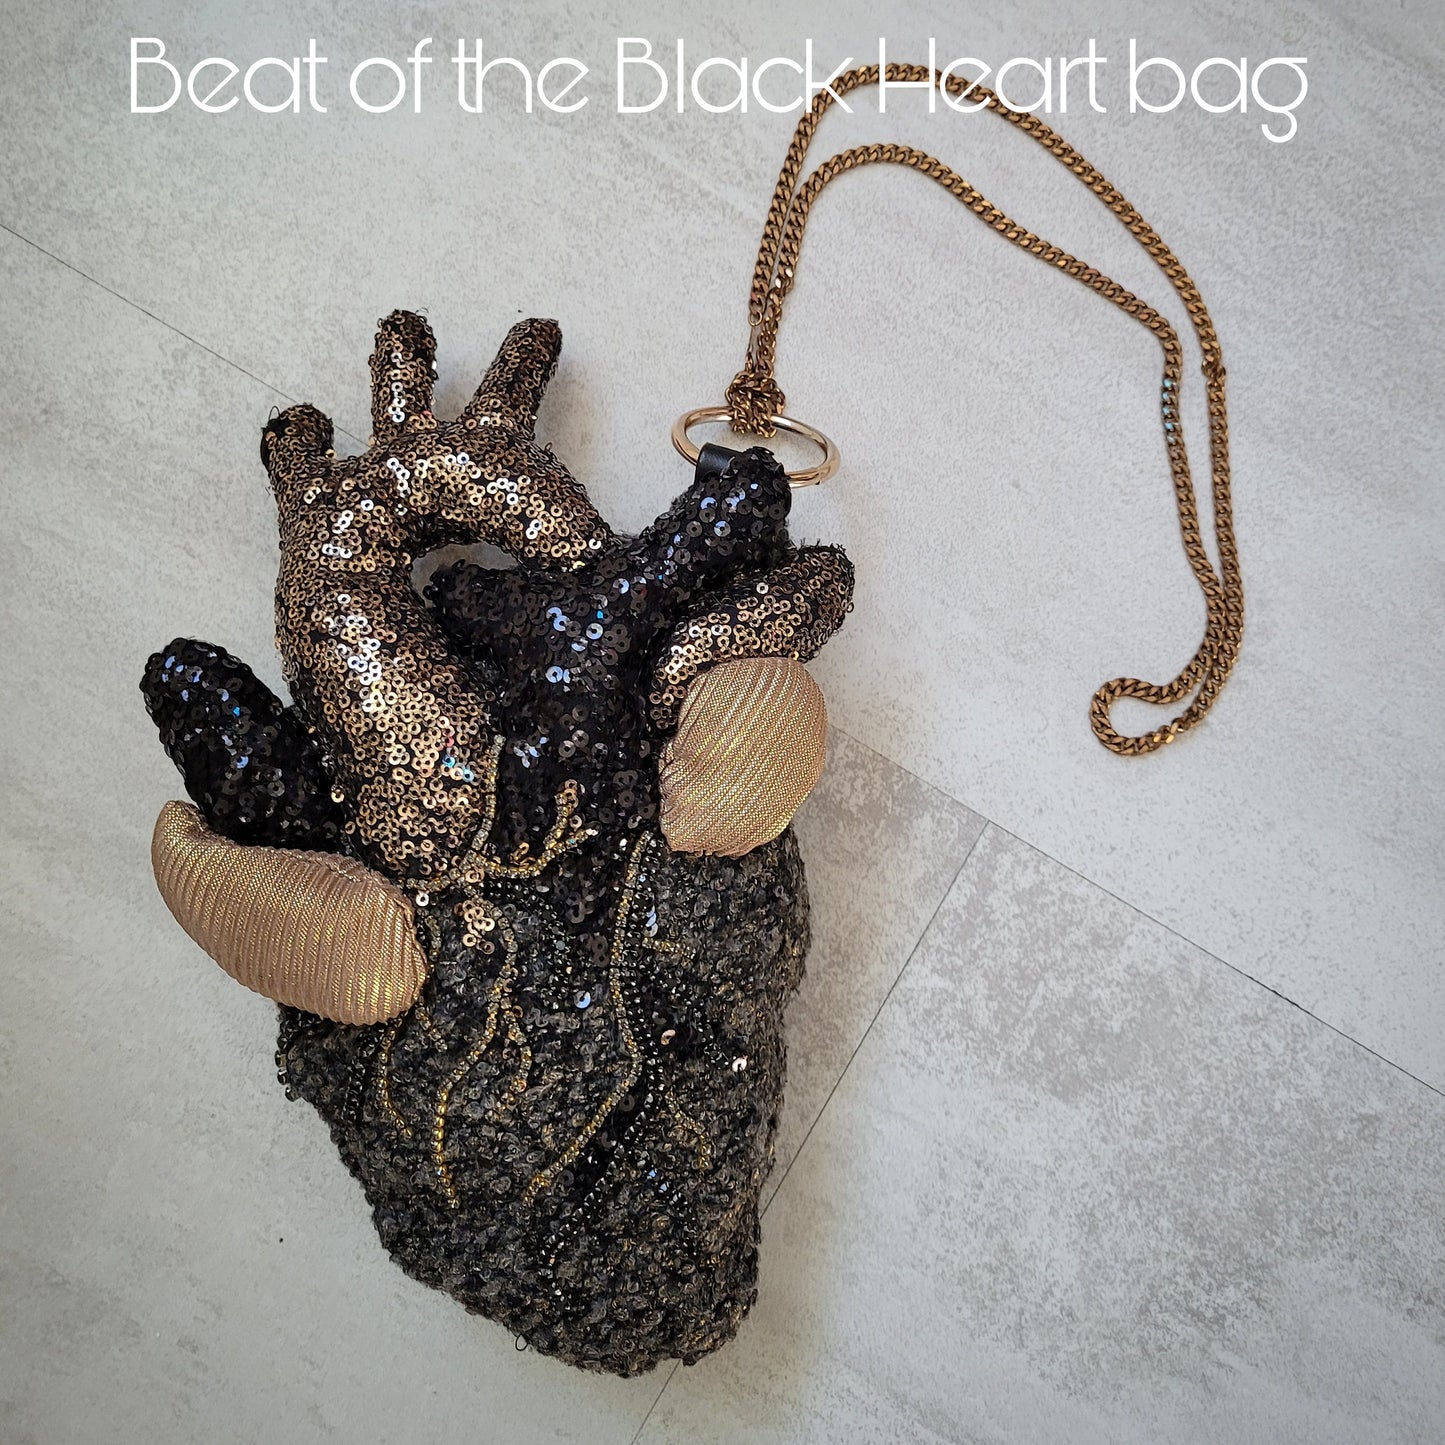 The Haunting Heart bag